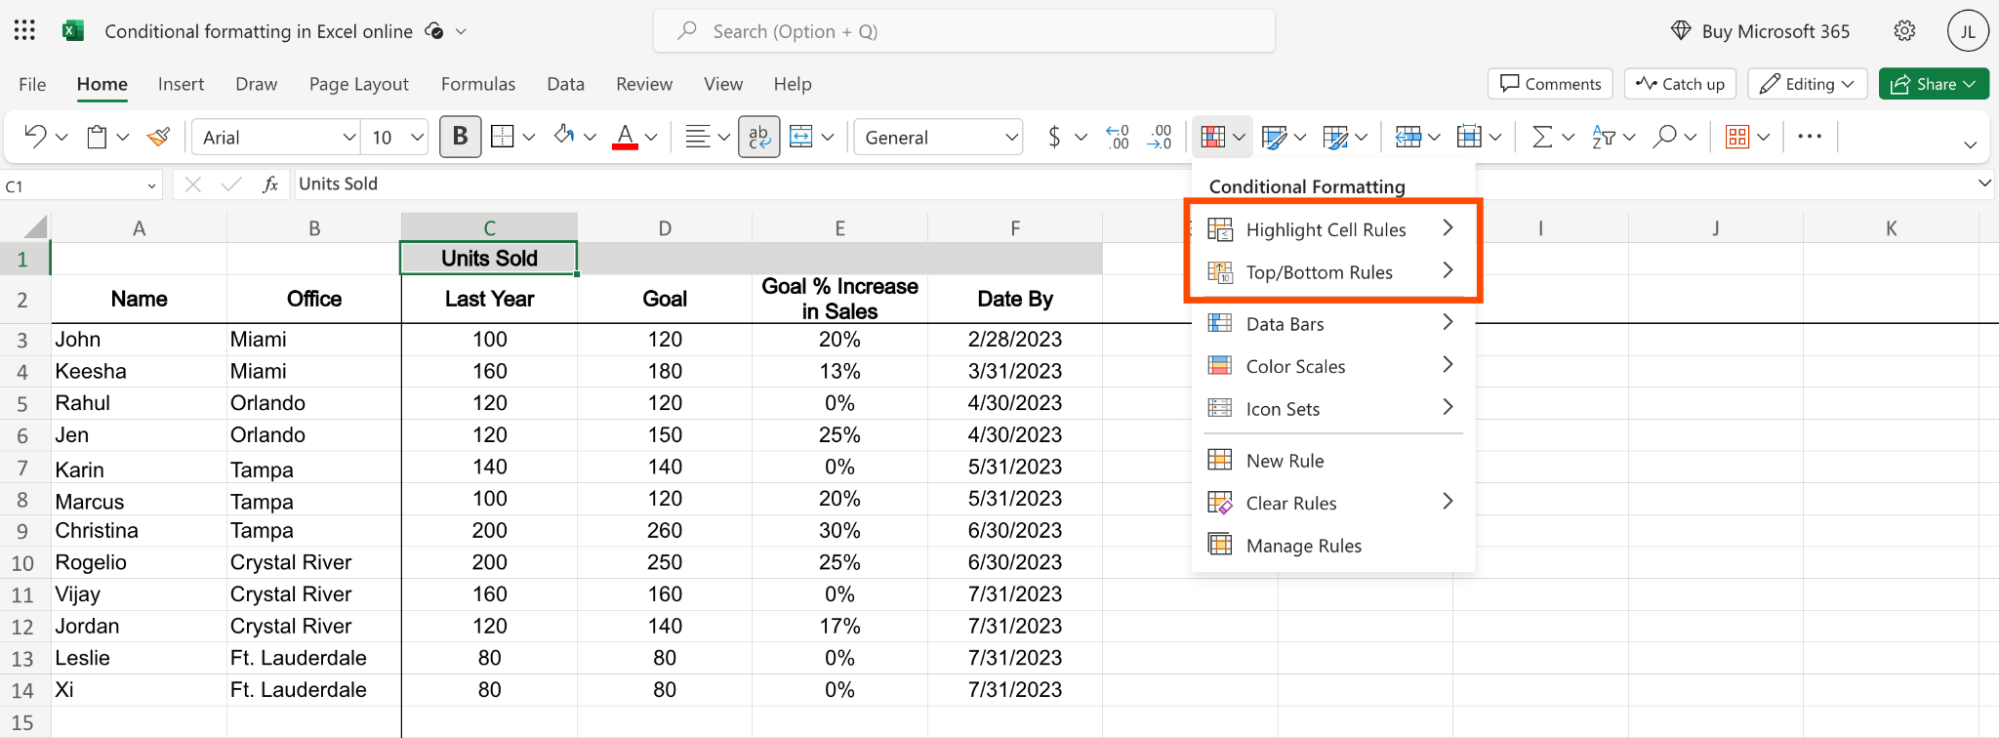 MS Excel 2010: Align text to the top of the cell